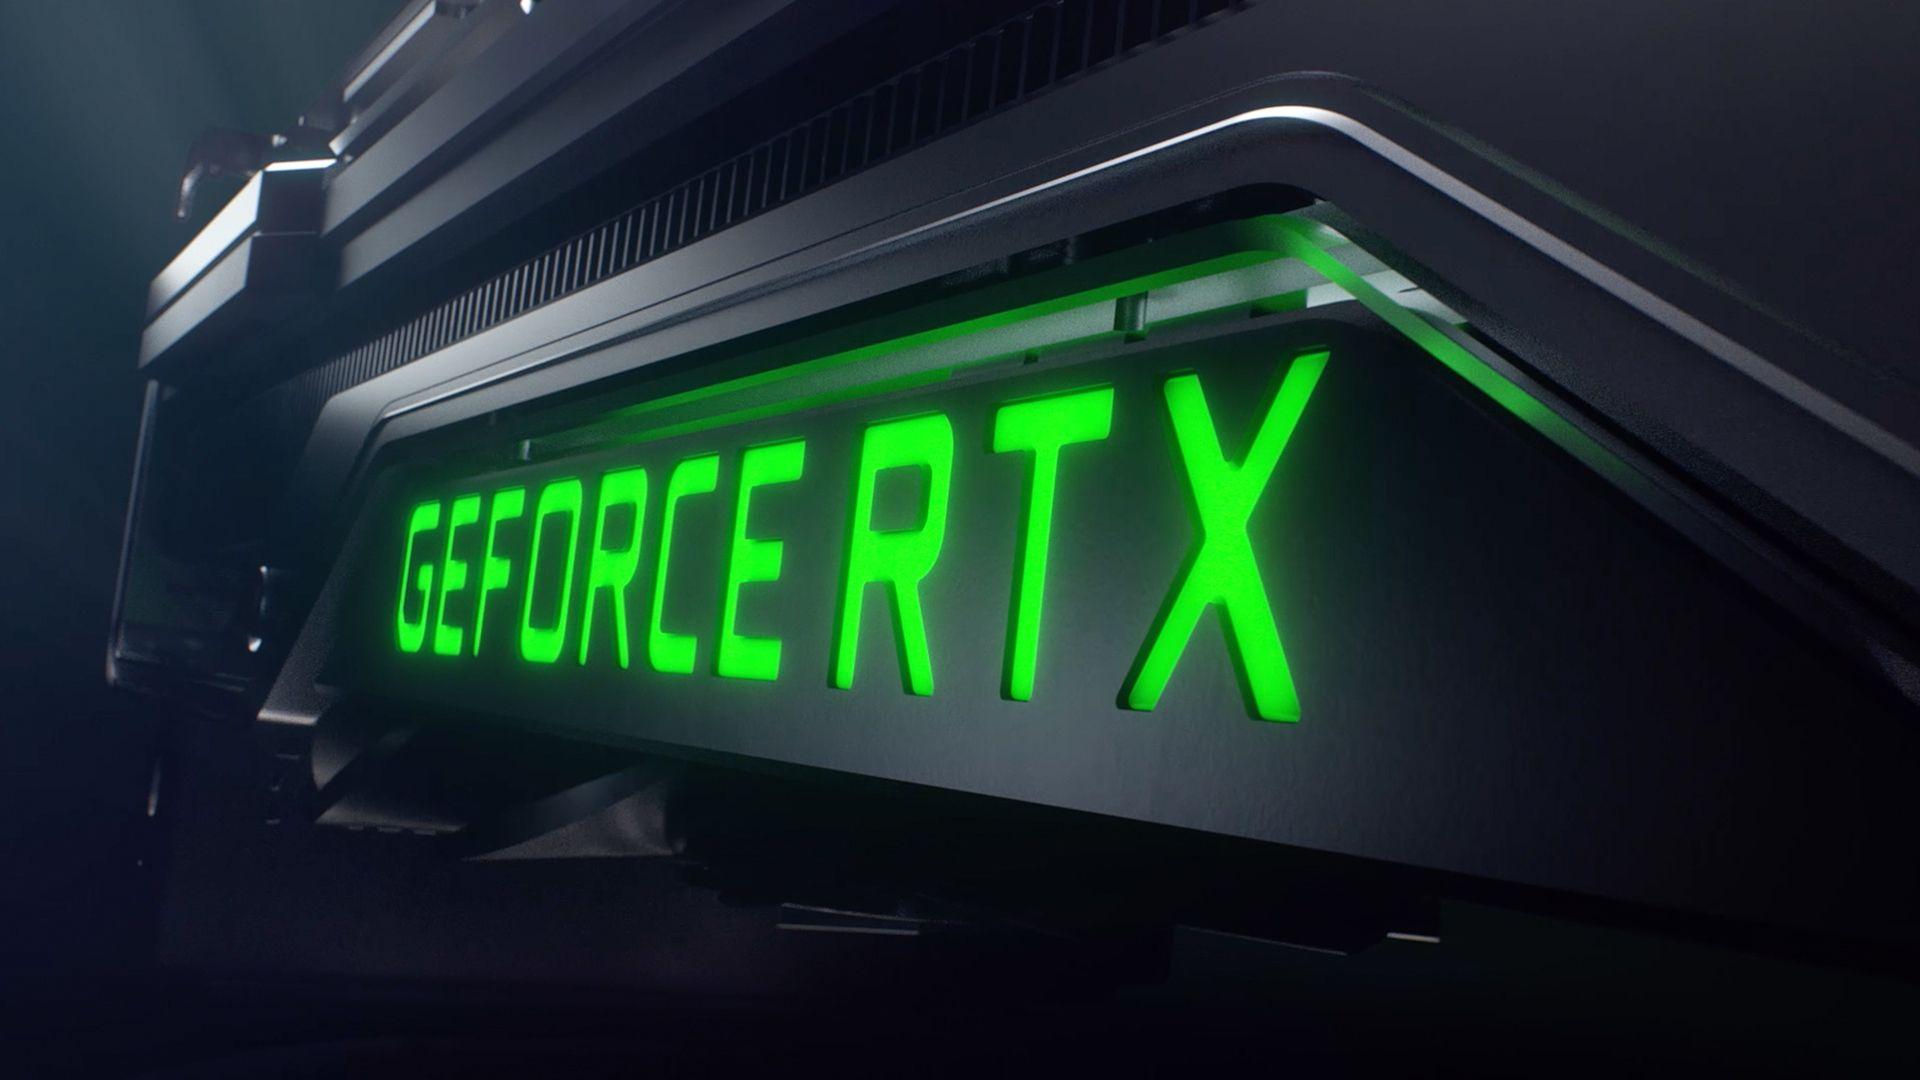 Geforce Rtx Wallpapers Top Free Geforce Rtx Backgrounds Wallpaperaccess